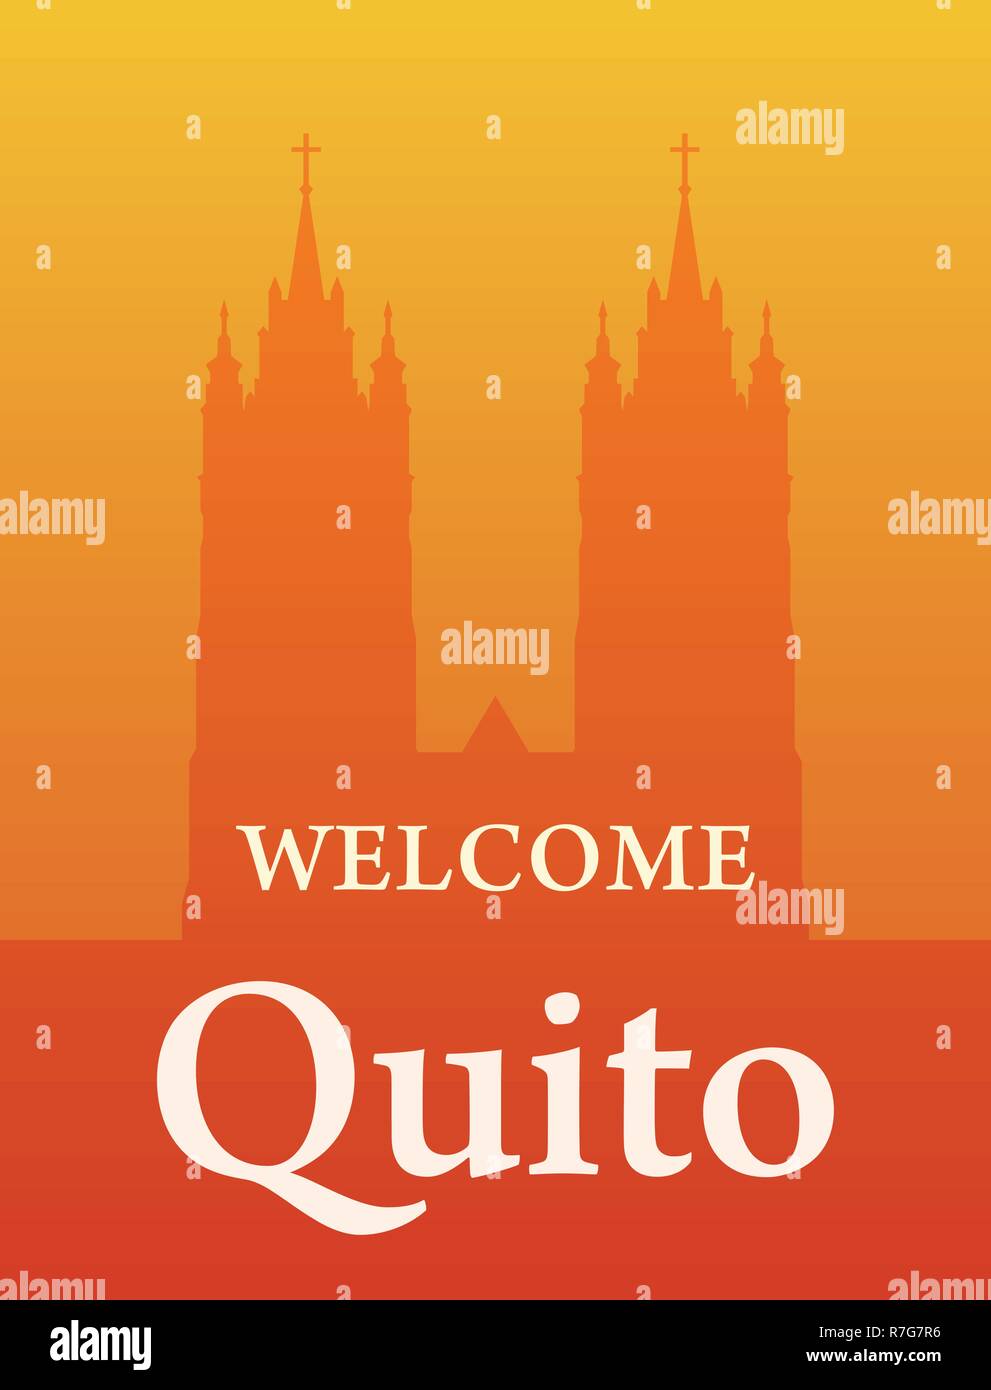 Basilica of the National Vow, Silhouette of Cathedral Towers in Quito, Ecuador - welcome invite banner orange color. Stock Vector